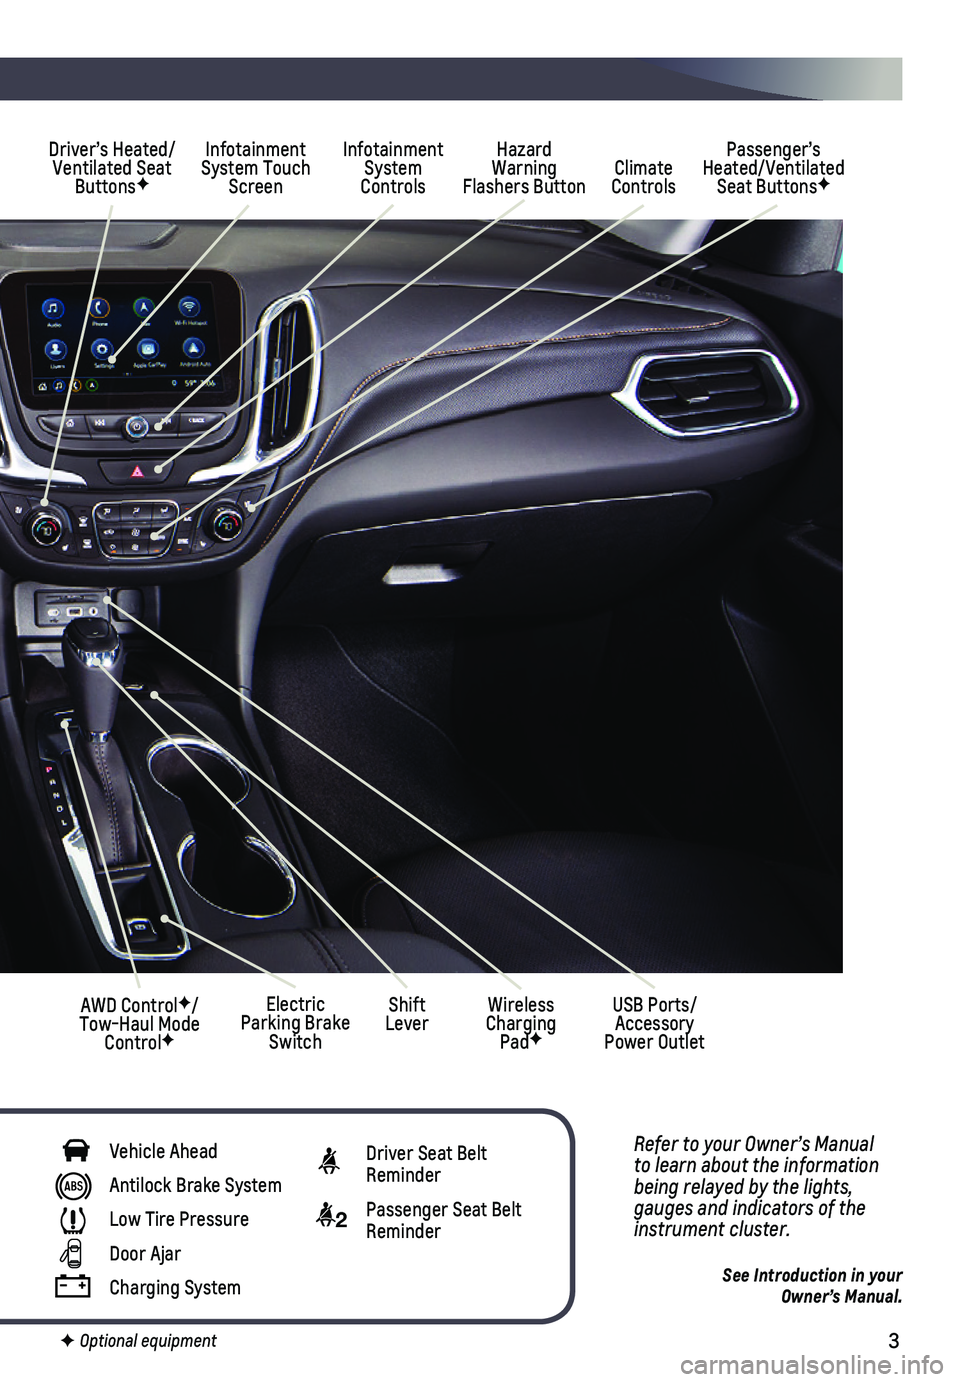 CHEVROLET EQUINOX 2020  Get To Know Guide 3
Refer to your Owner’s Manual to learn about the information being relayed by the lights, gauges and indicators of the instrument cluster.
See Introduction in your  Owner’s Manual.
F Optional equ